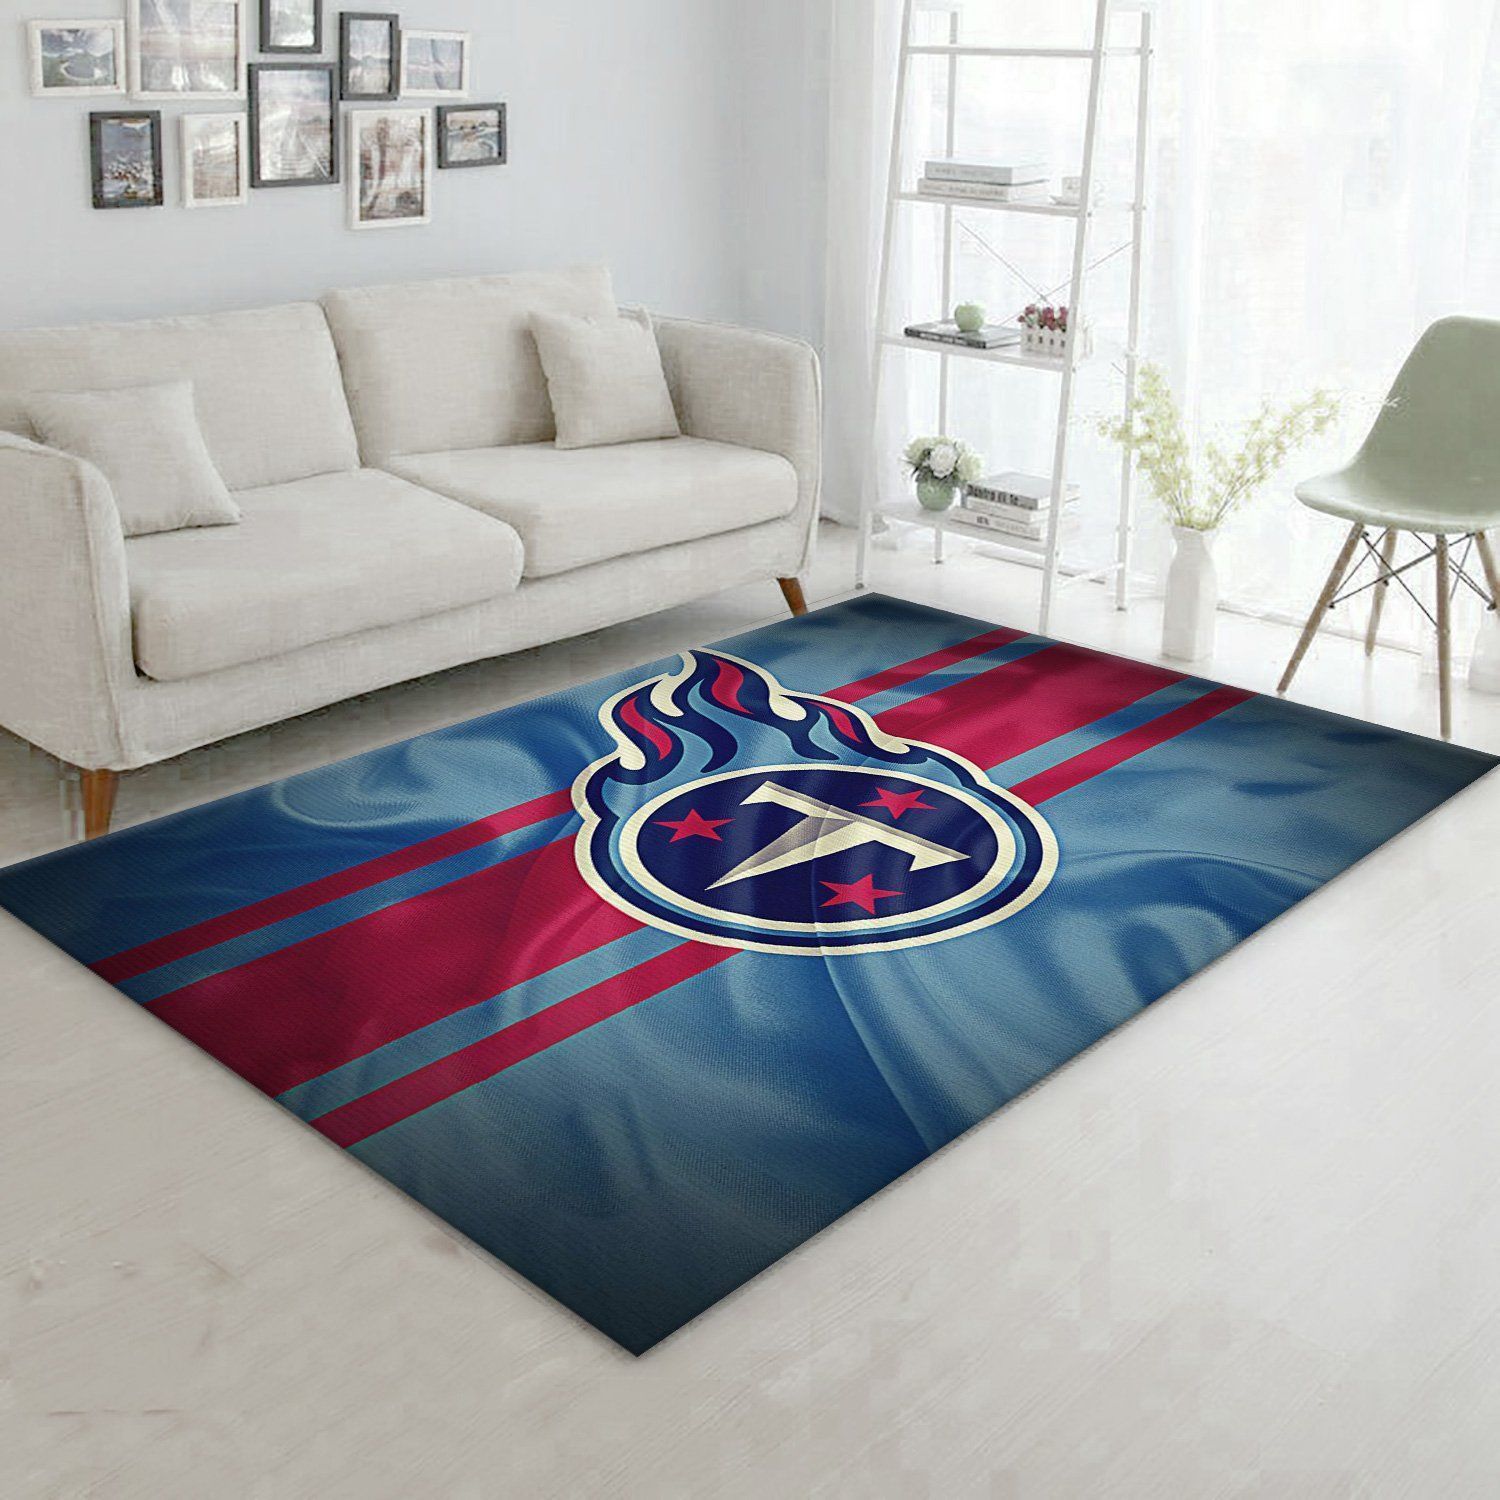 Tennessee Titans American Nfl Rug Living Room Rug US Gift Decor - Indoor Outdoor Rugs 3